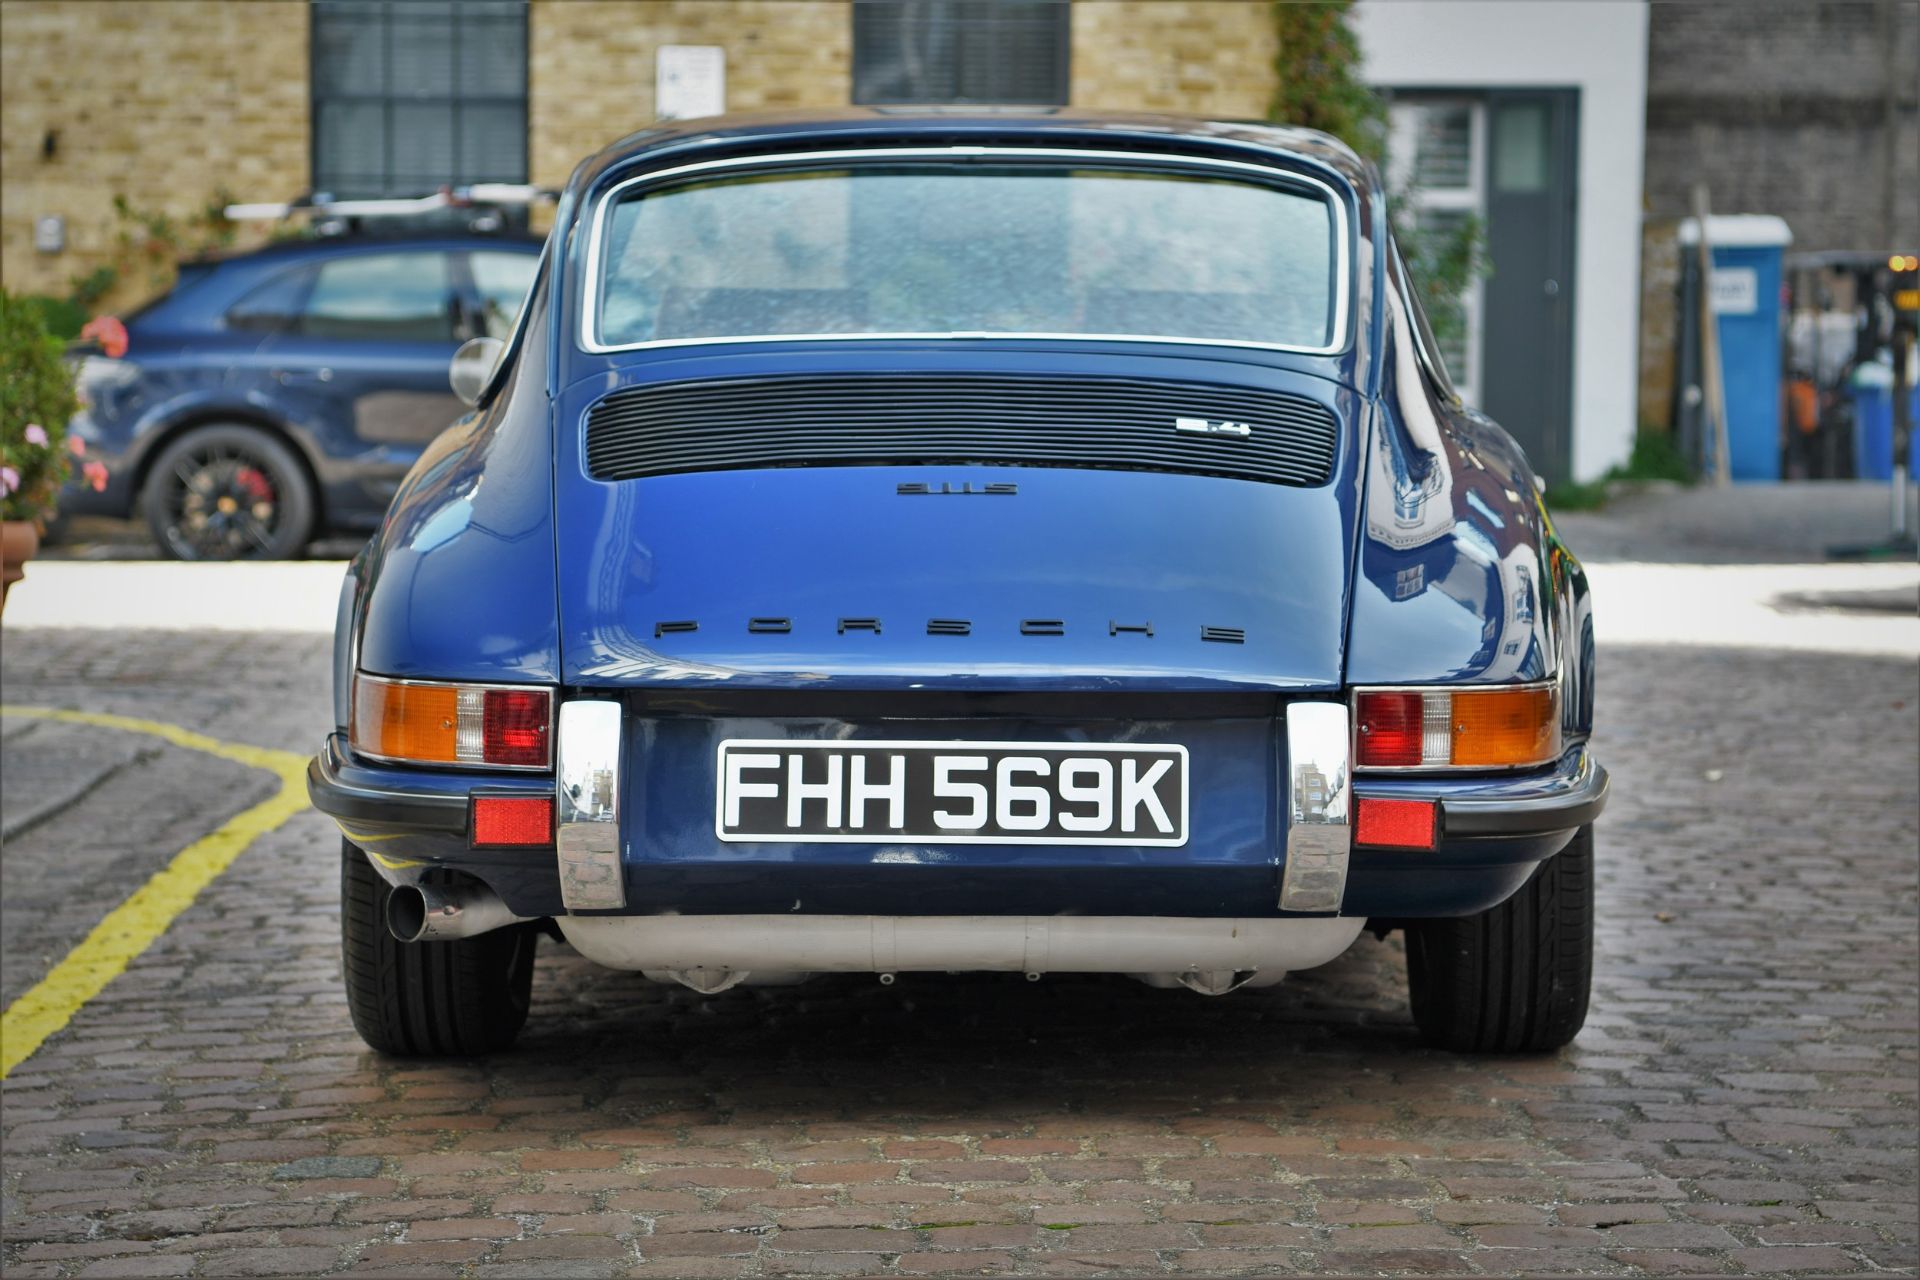 1972 PORSCHE 911 2.4 'S' 'OELKLAPPE COUPE' Registration Number : FHH 569K Chassis Number : - Image 5 of 28